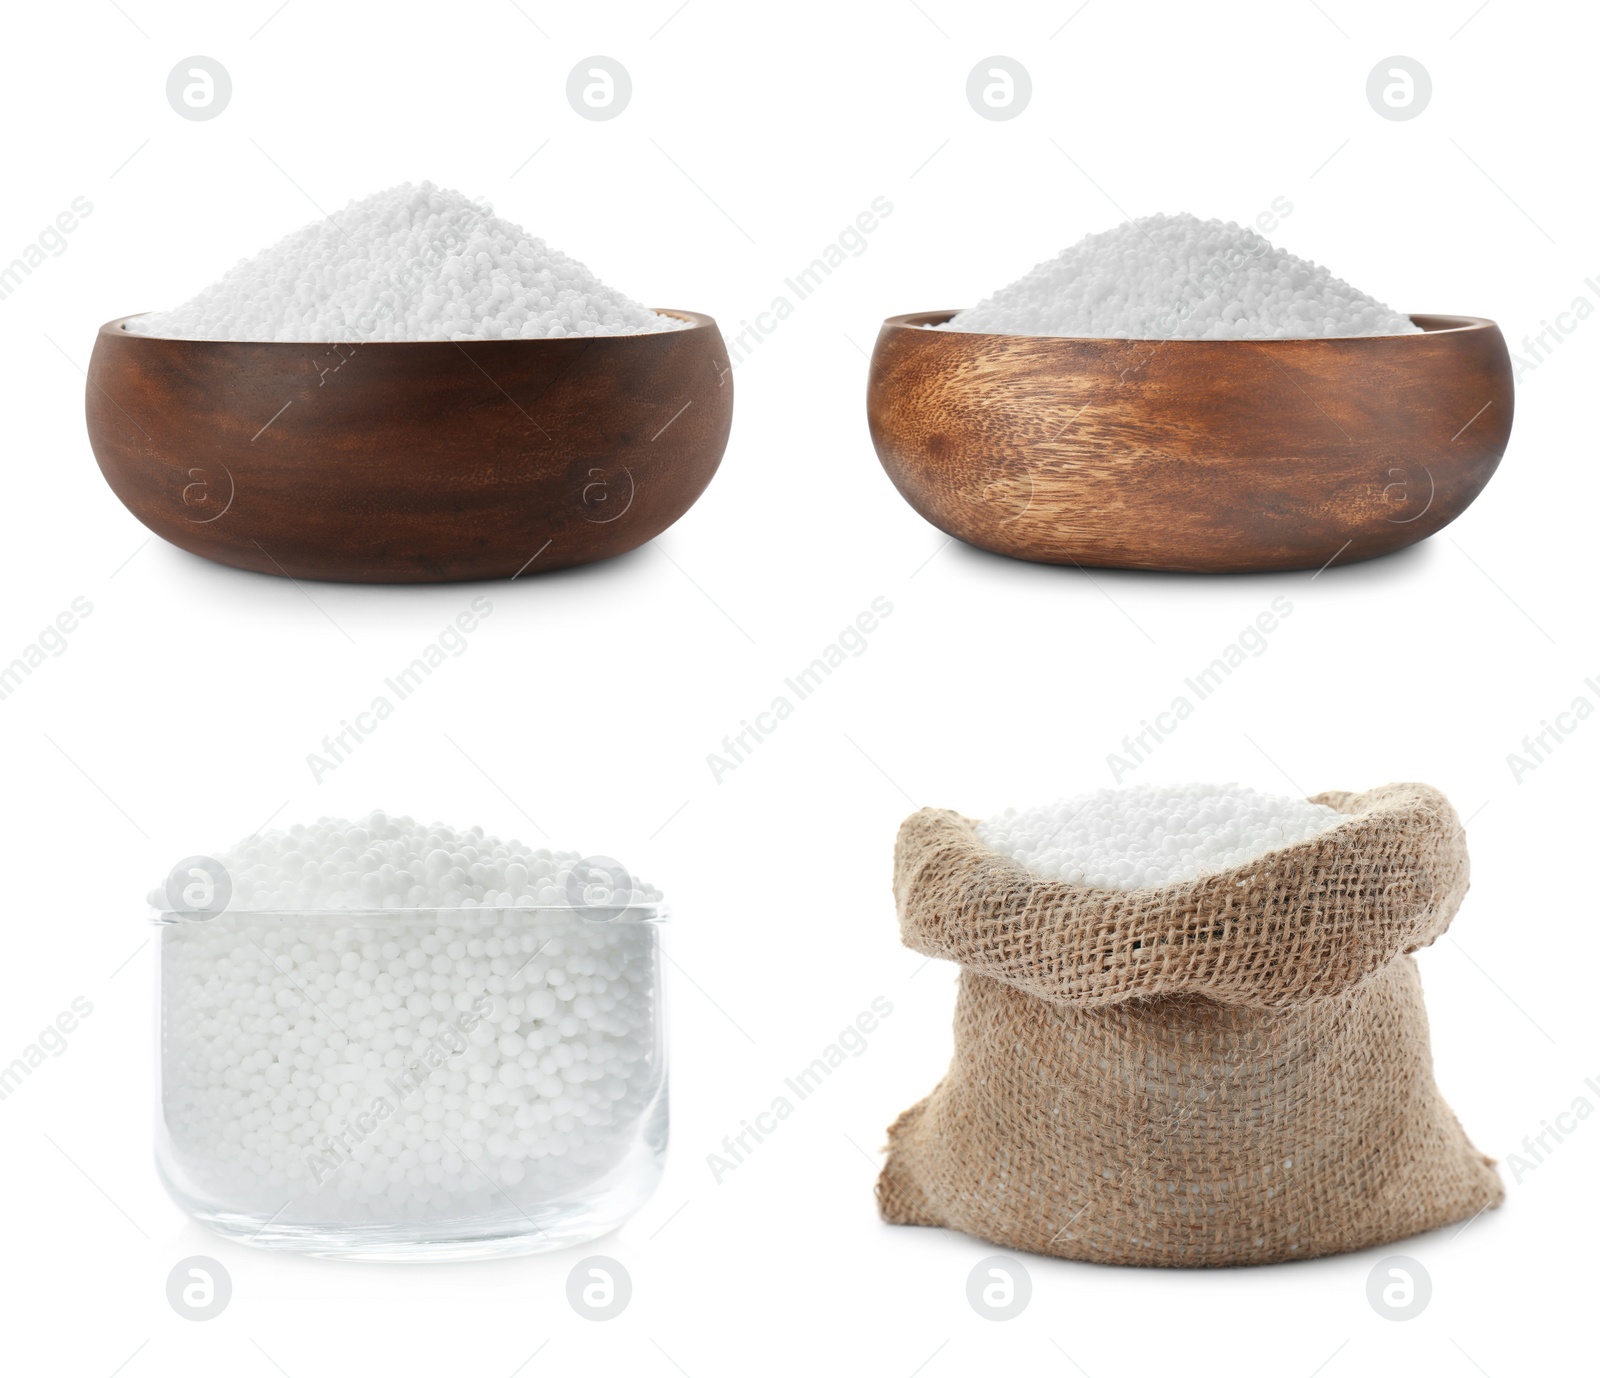 Image of Set with ammonium nitrate pellets on white background. Mineral fertilizer